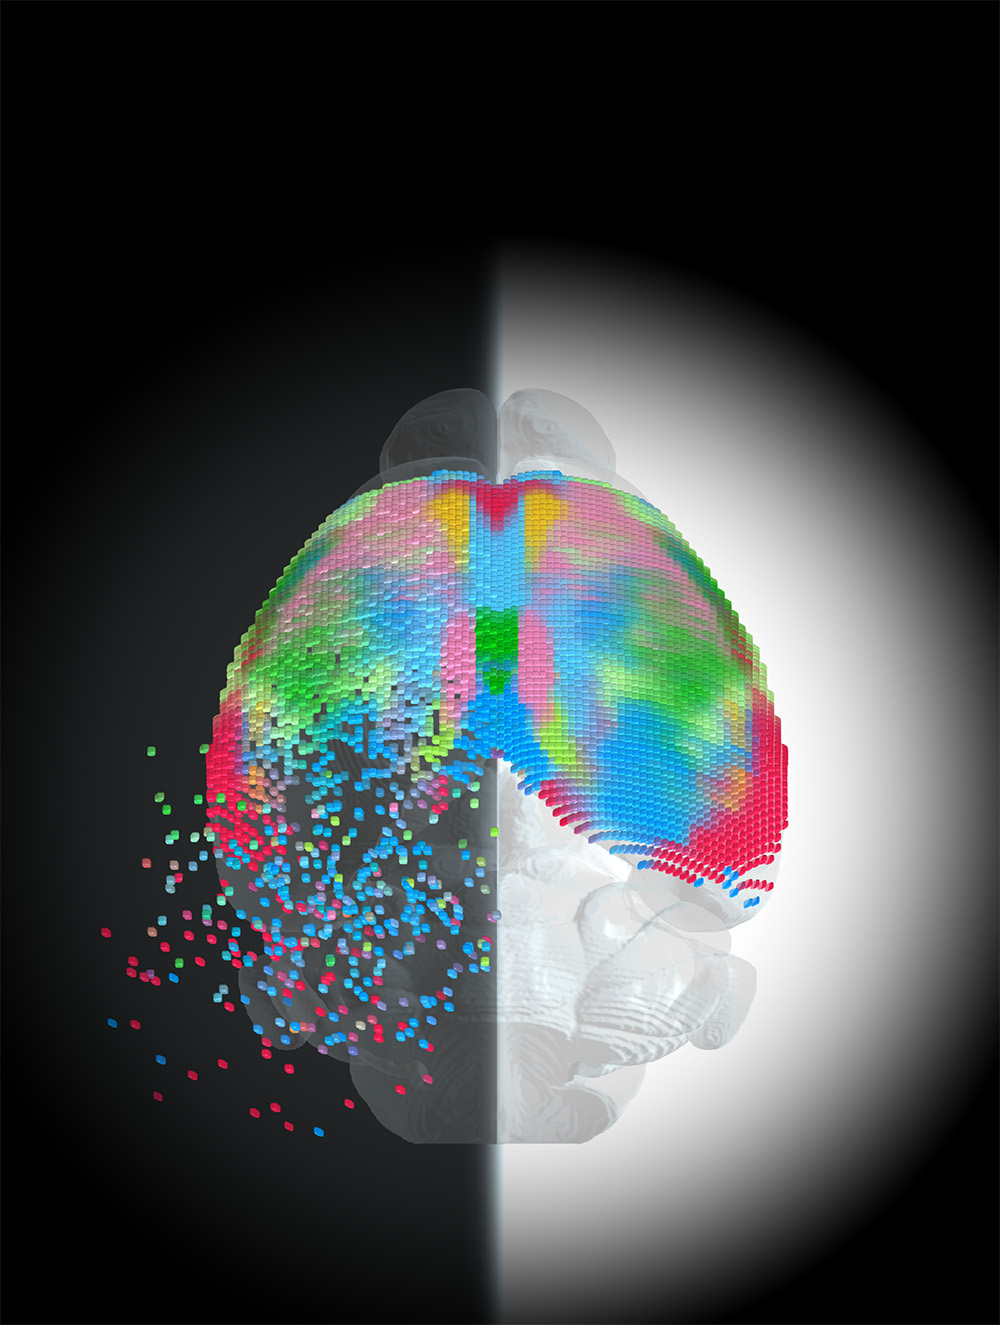 points of multicolored fragments float away from a mouse brain